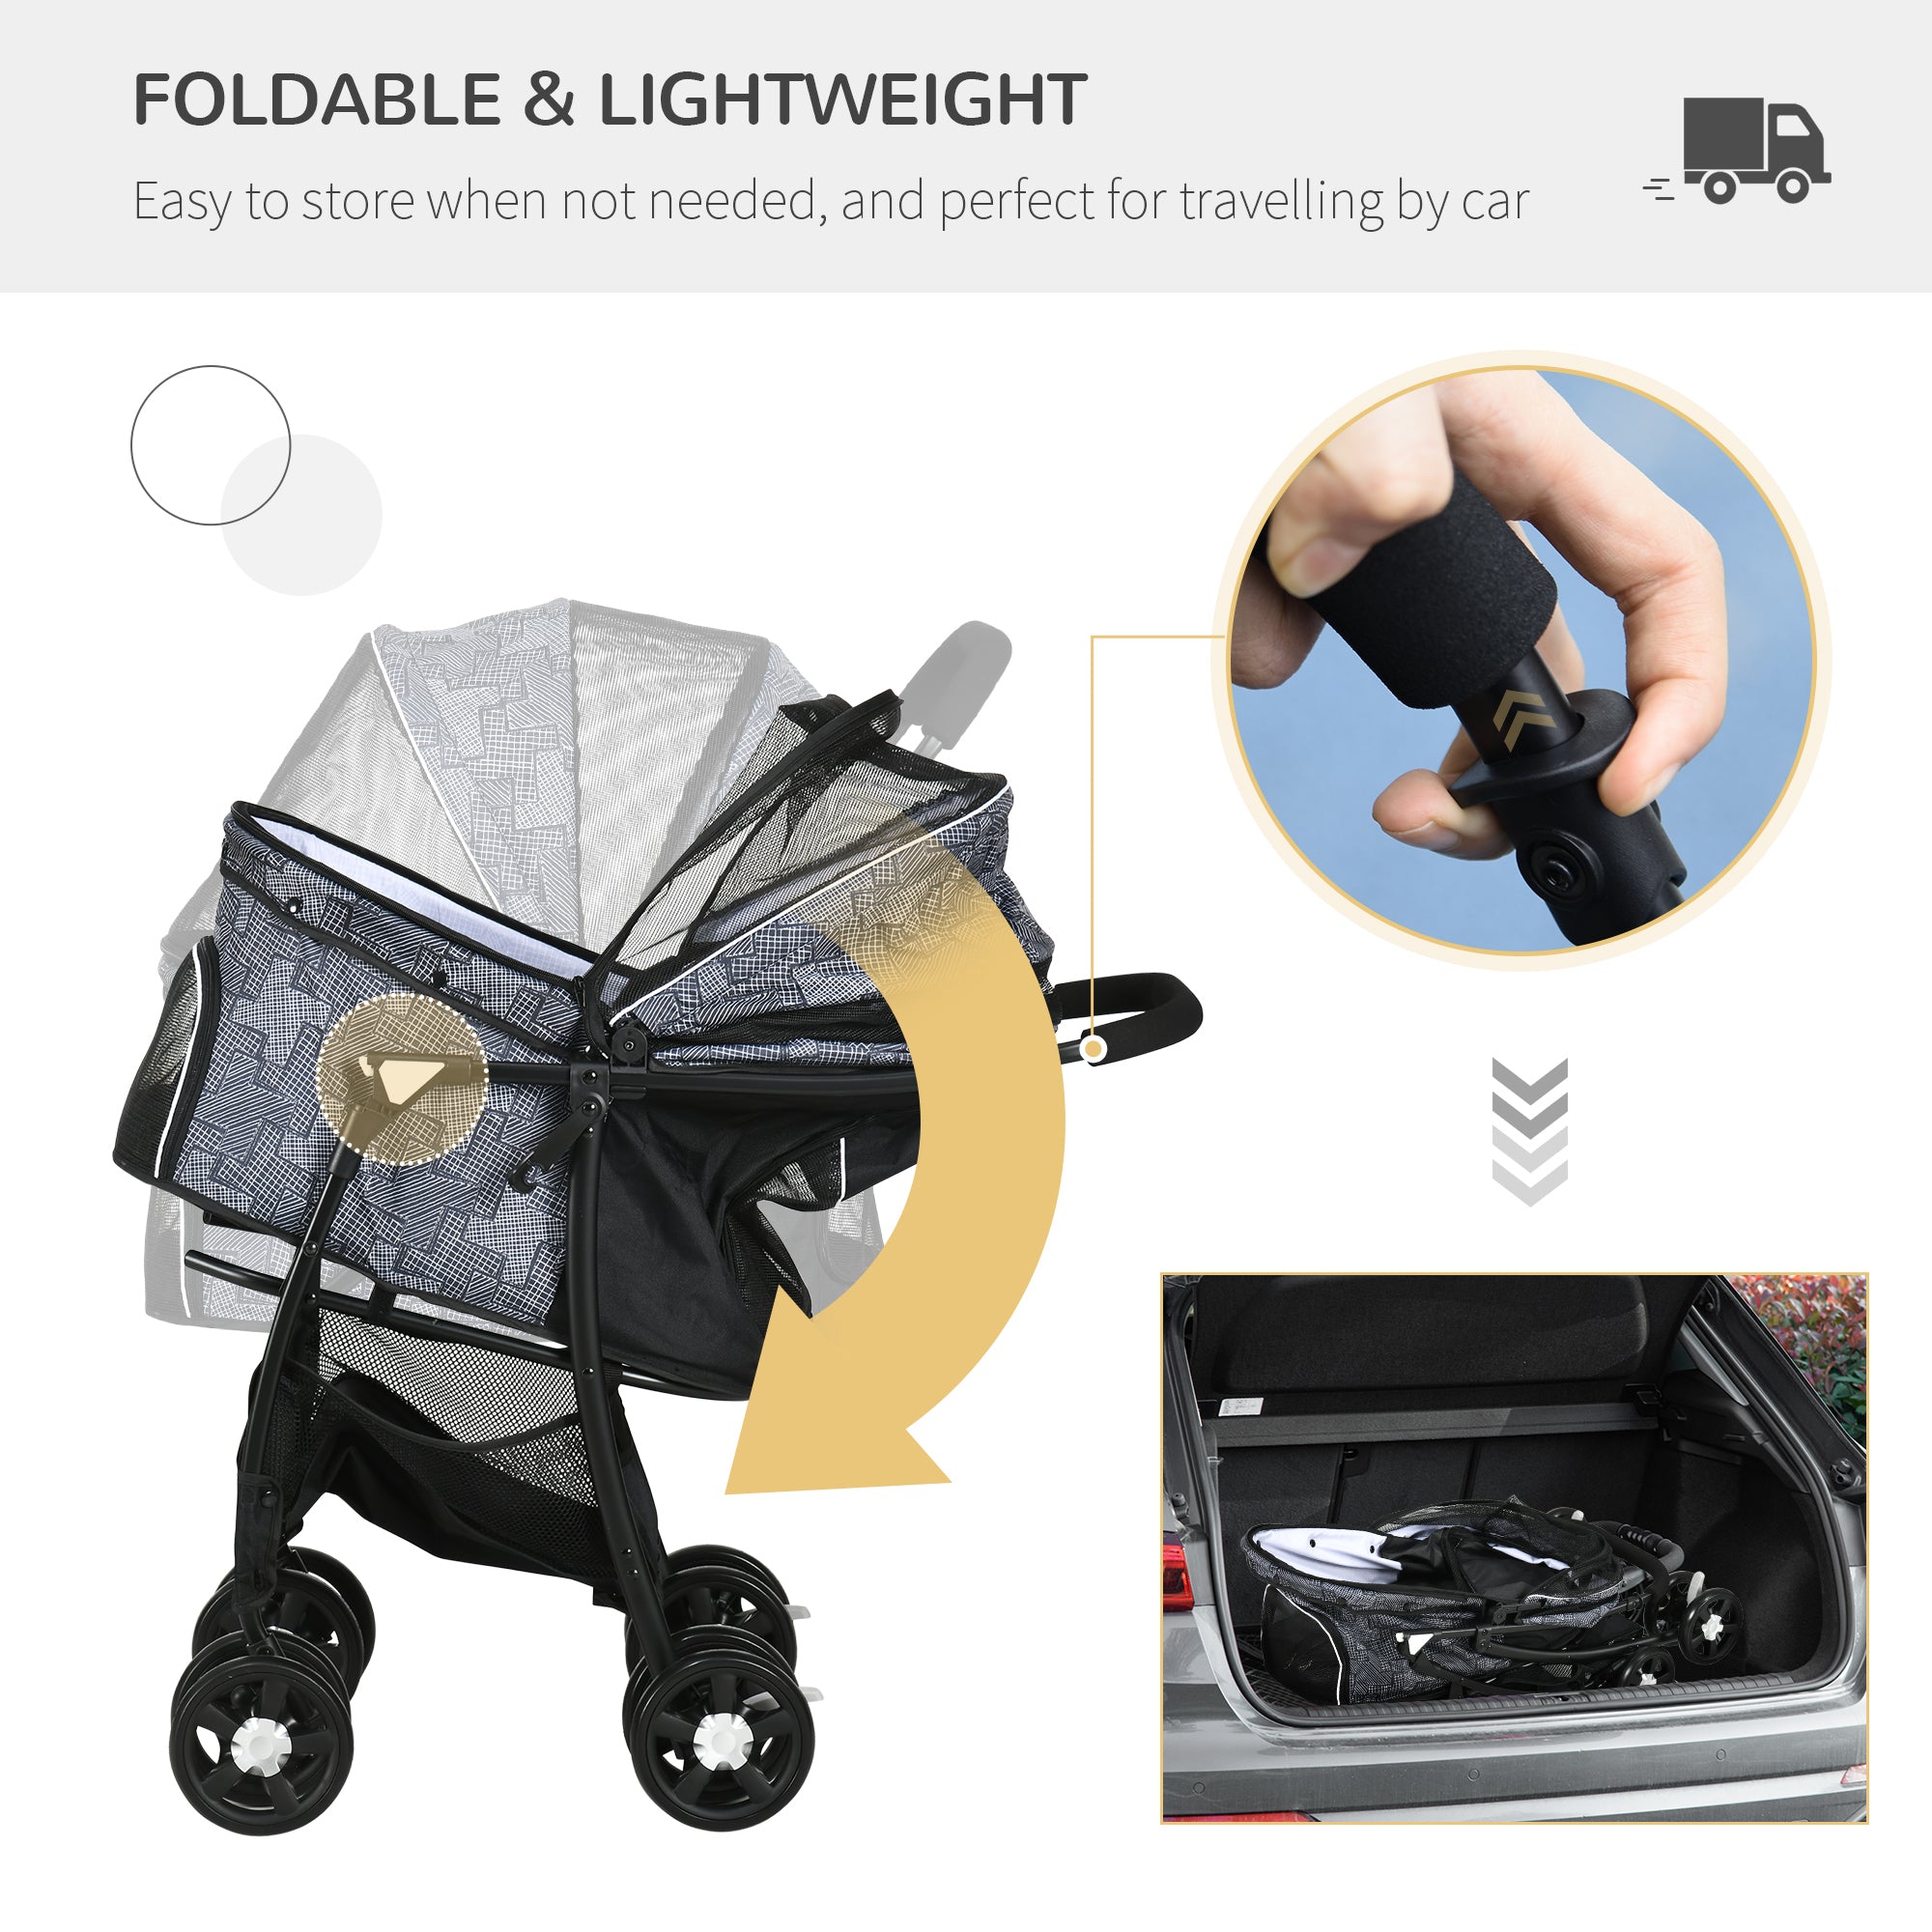 PawHut Pet Stroller Dog Pushchair Cat Travel Carriage Foldable Carrying Bag w/ Universal Wheels, Brake Canopy for XS & S Sized Pets, Grey